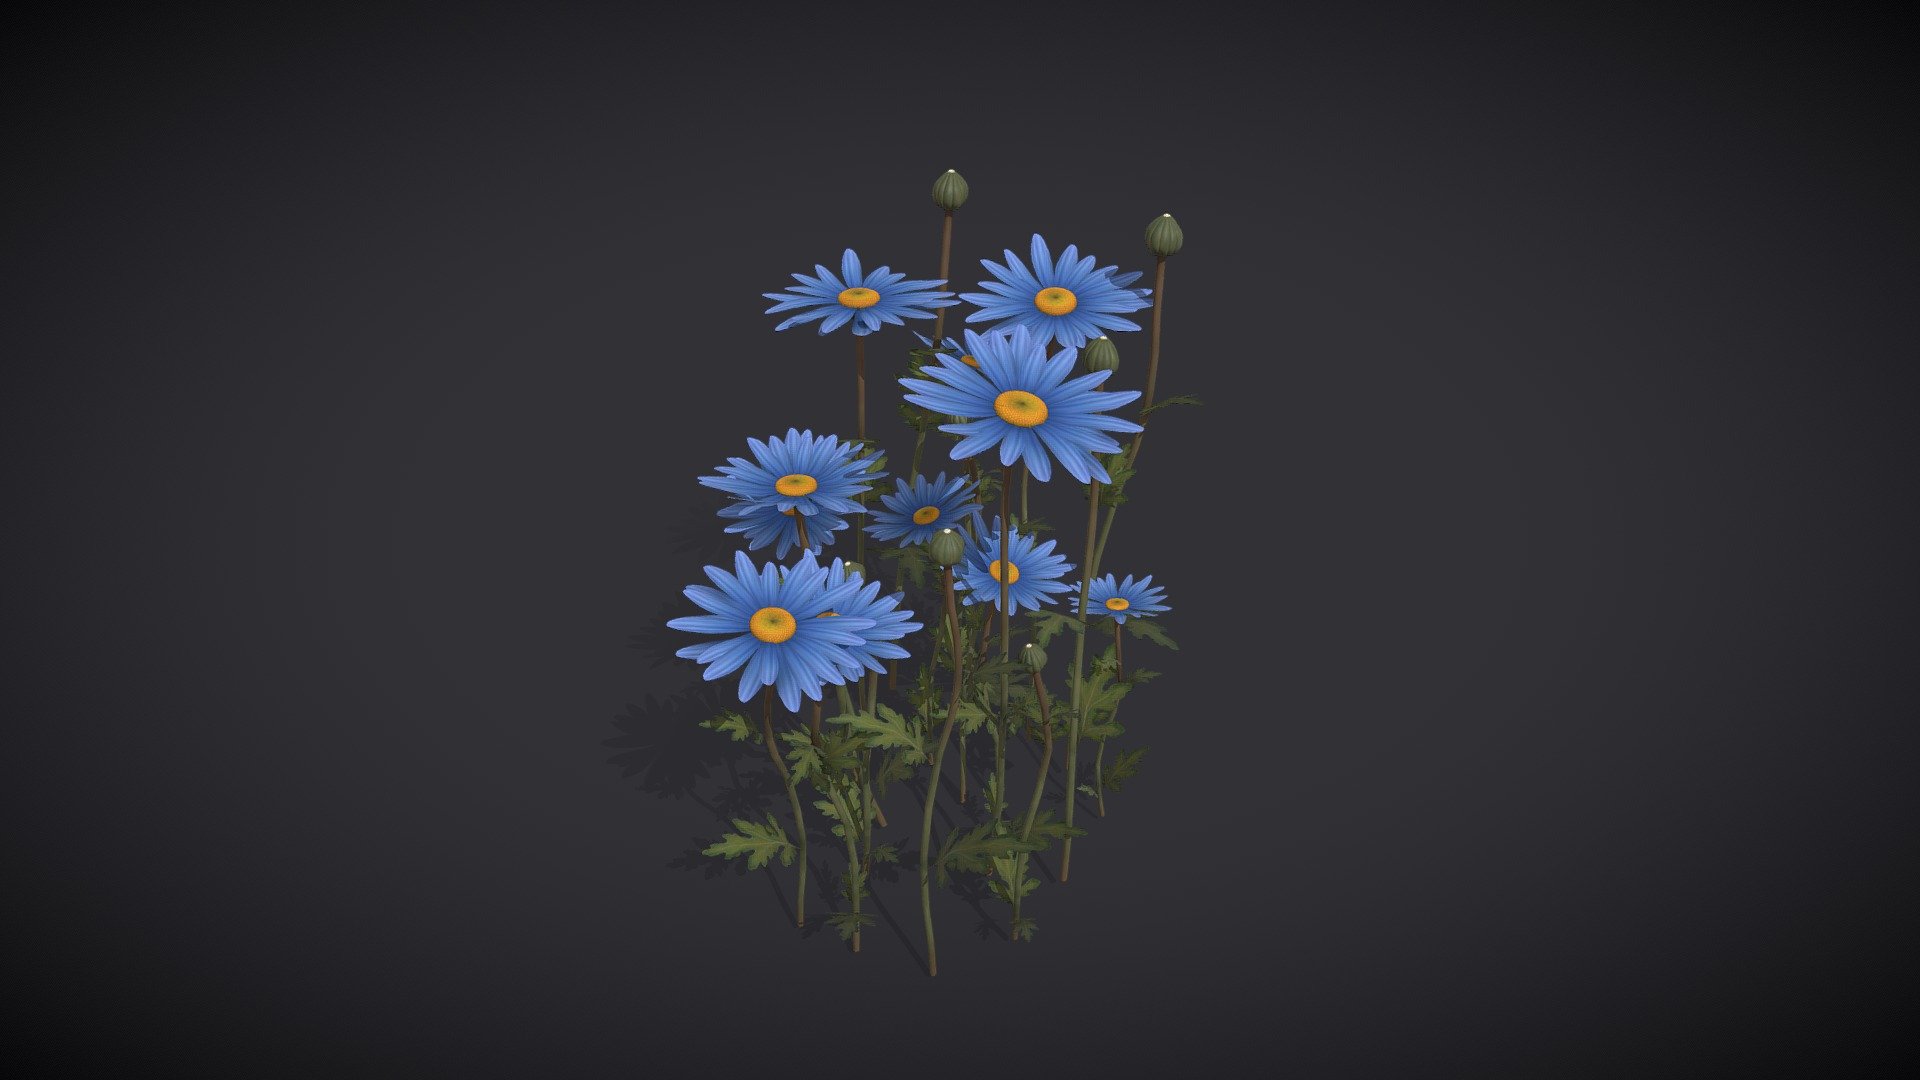 Museum Of Natural History - Asset Pack





Daisy Flowers Patch

VR Ready

.......................................

OVA’s flagship software, StellarX, allows those with no programming or coding knowledge to place 3D goods and create immersive experiences through simple drag-and-drop actions. 

Storytelling, which involves a series of interactions, sequences, and triggers are easily created through OVA’s patent-pending visual scripting tool. 

.......................................

**Download StellarX on the Meta Quest Store: oculus.com/experiences/quest/8132958546745663
**

**Download StellarX on Steam: store.steampowered.com/app/1214640/StellarX
**

Have a bigger immersive project in mind? Get in touch with us! 



StellarX on LinkedIn: linkedin.com/showcase/stellarx-by-ova

Join the StellarX Discord server! 

.......................................

StellarX© 2022 - Museum Of Natural History | Daisy Flowers - Buy Royalty Free 3D model by StellarX 3d model